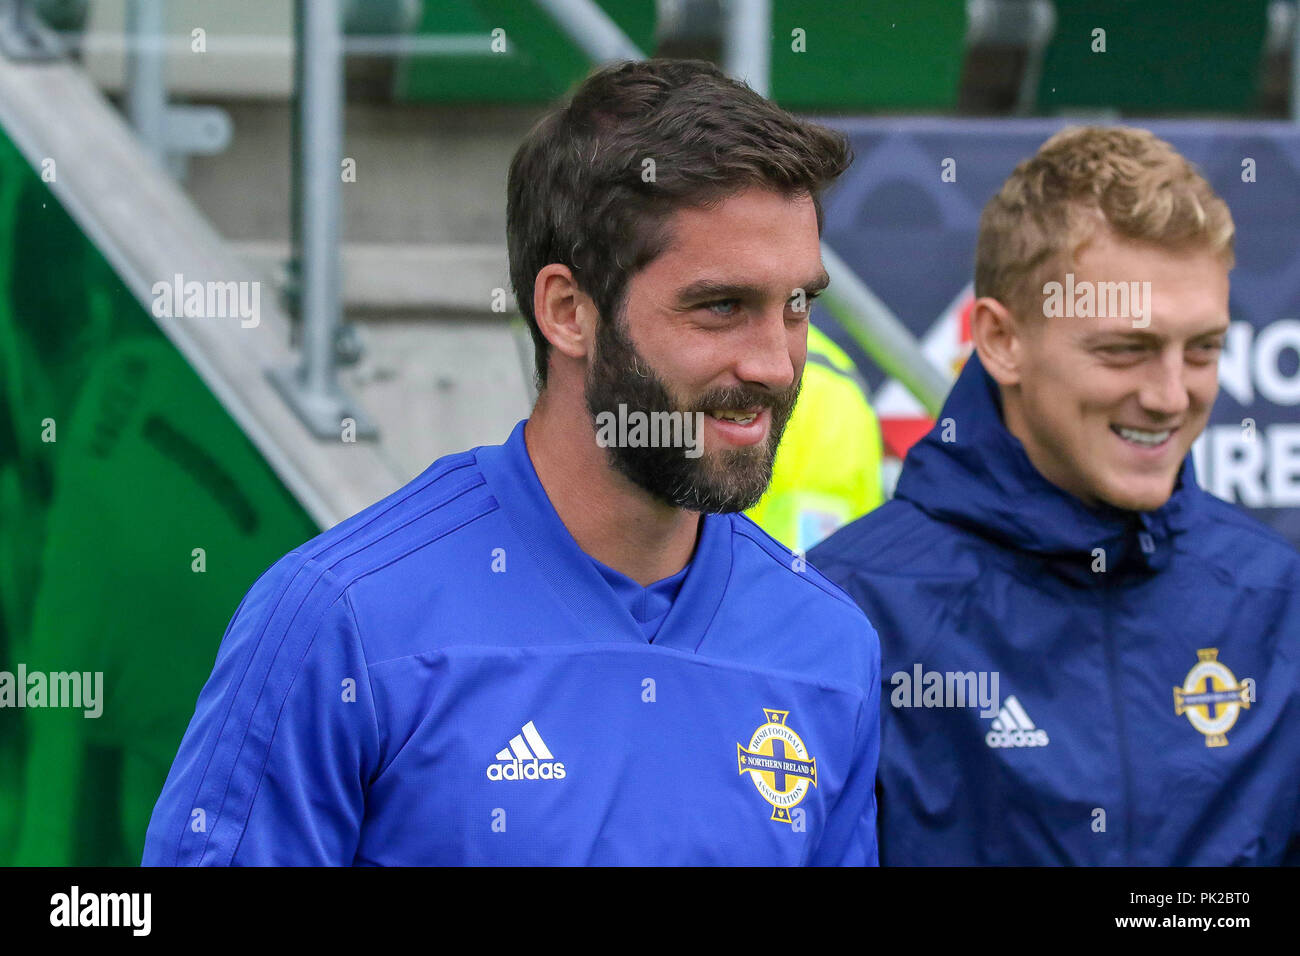 Windsor Park, Belfast, Northern Ireland. 10 September 2018. After Saturday's defeat in the UEFA Nations League, Northern Ireland returned to training this morning at Windsor Park. Tomorrow night they play Israel in a friendly international. Will Grigg (left) and George Saville. Credit: David Hunter/Alamy Live News. Stock Photo